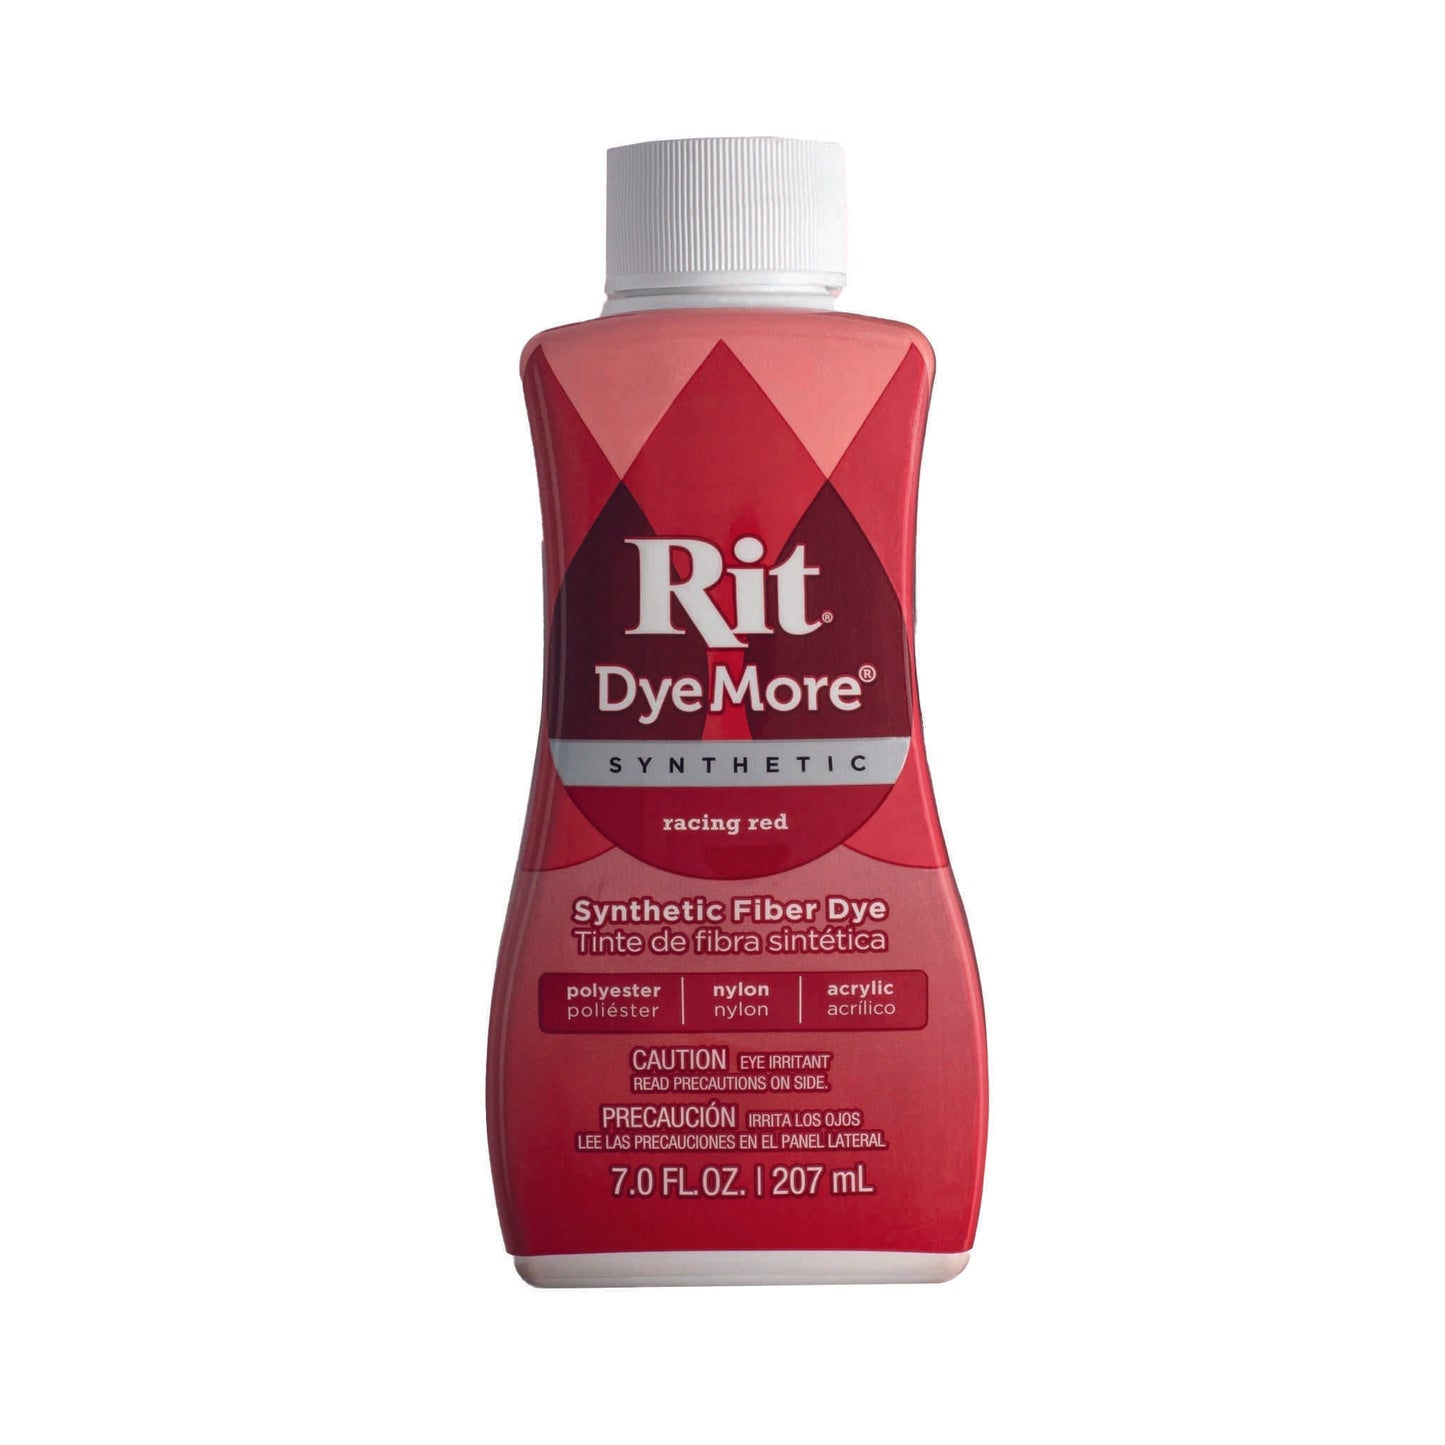 Racing red coloured Rit DyeMore synthetic fibre dye bottle on a white background.